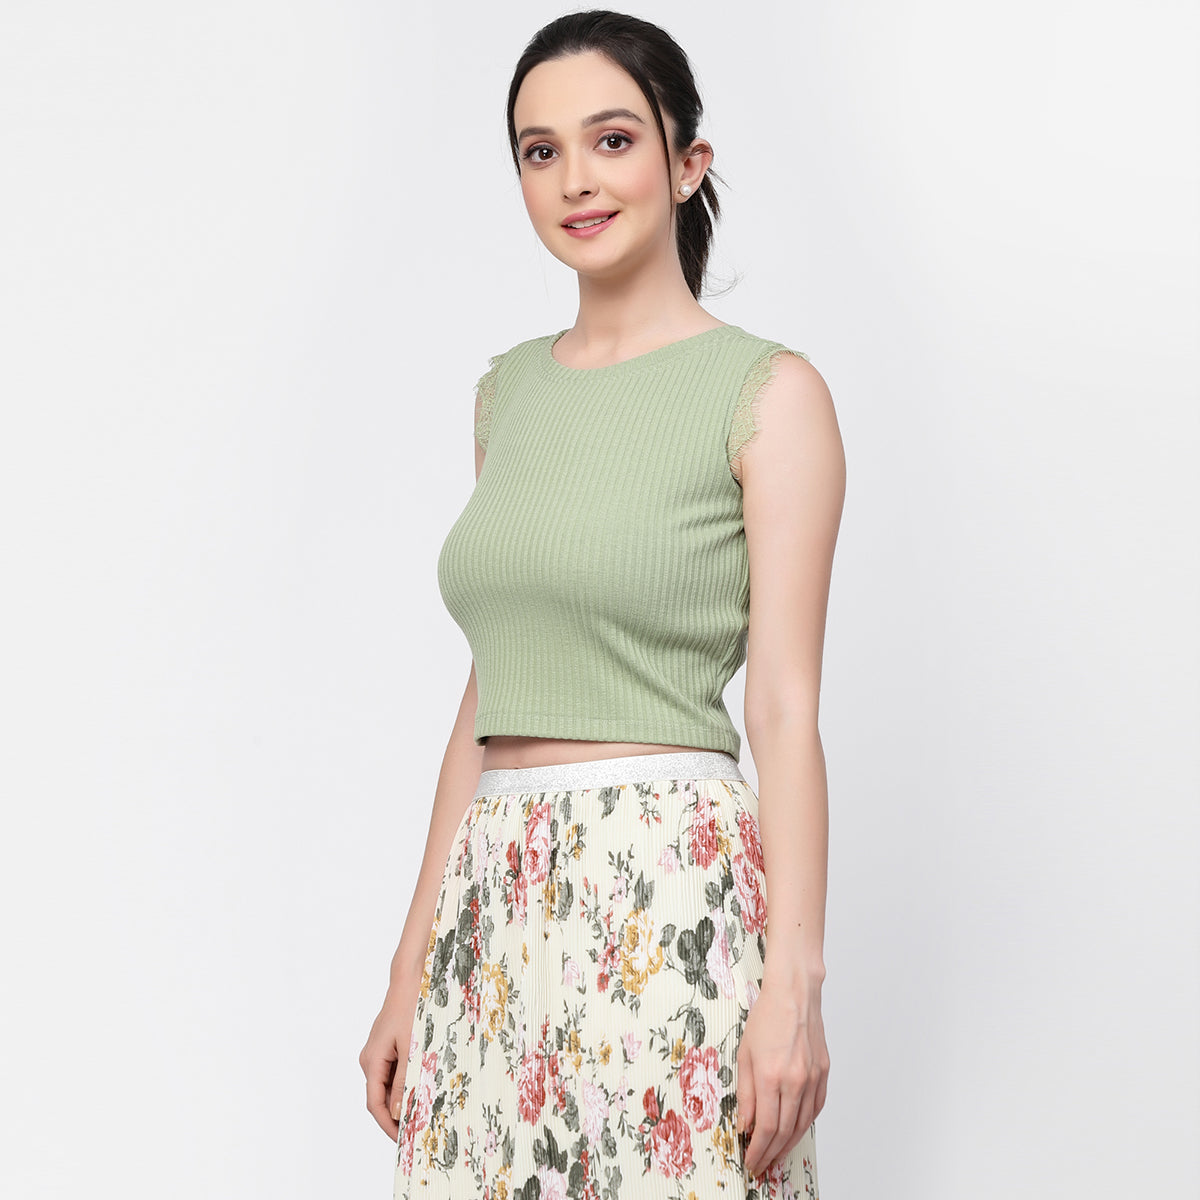 Green Knit Crop Top With Lace